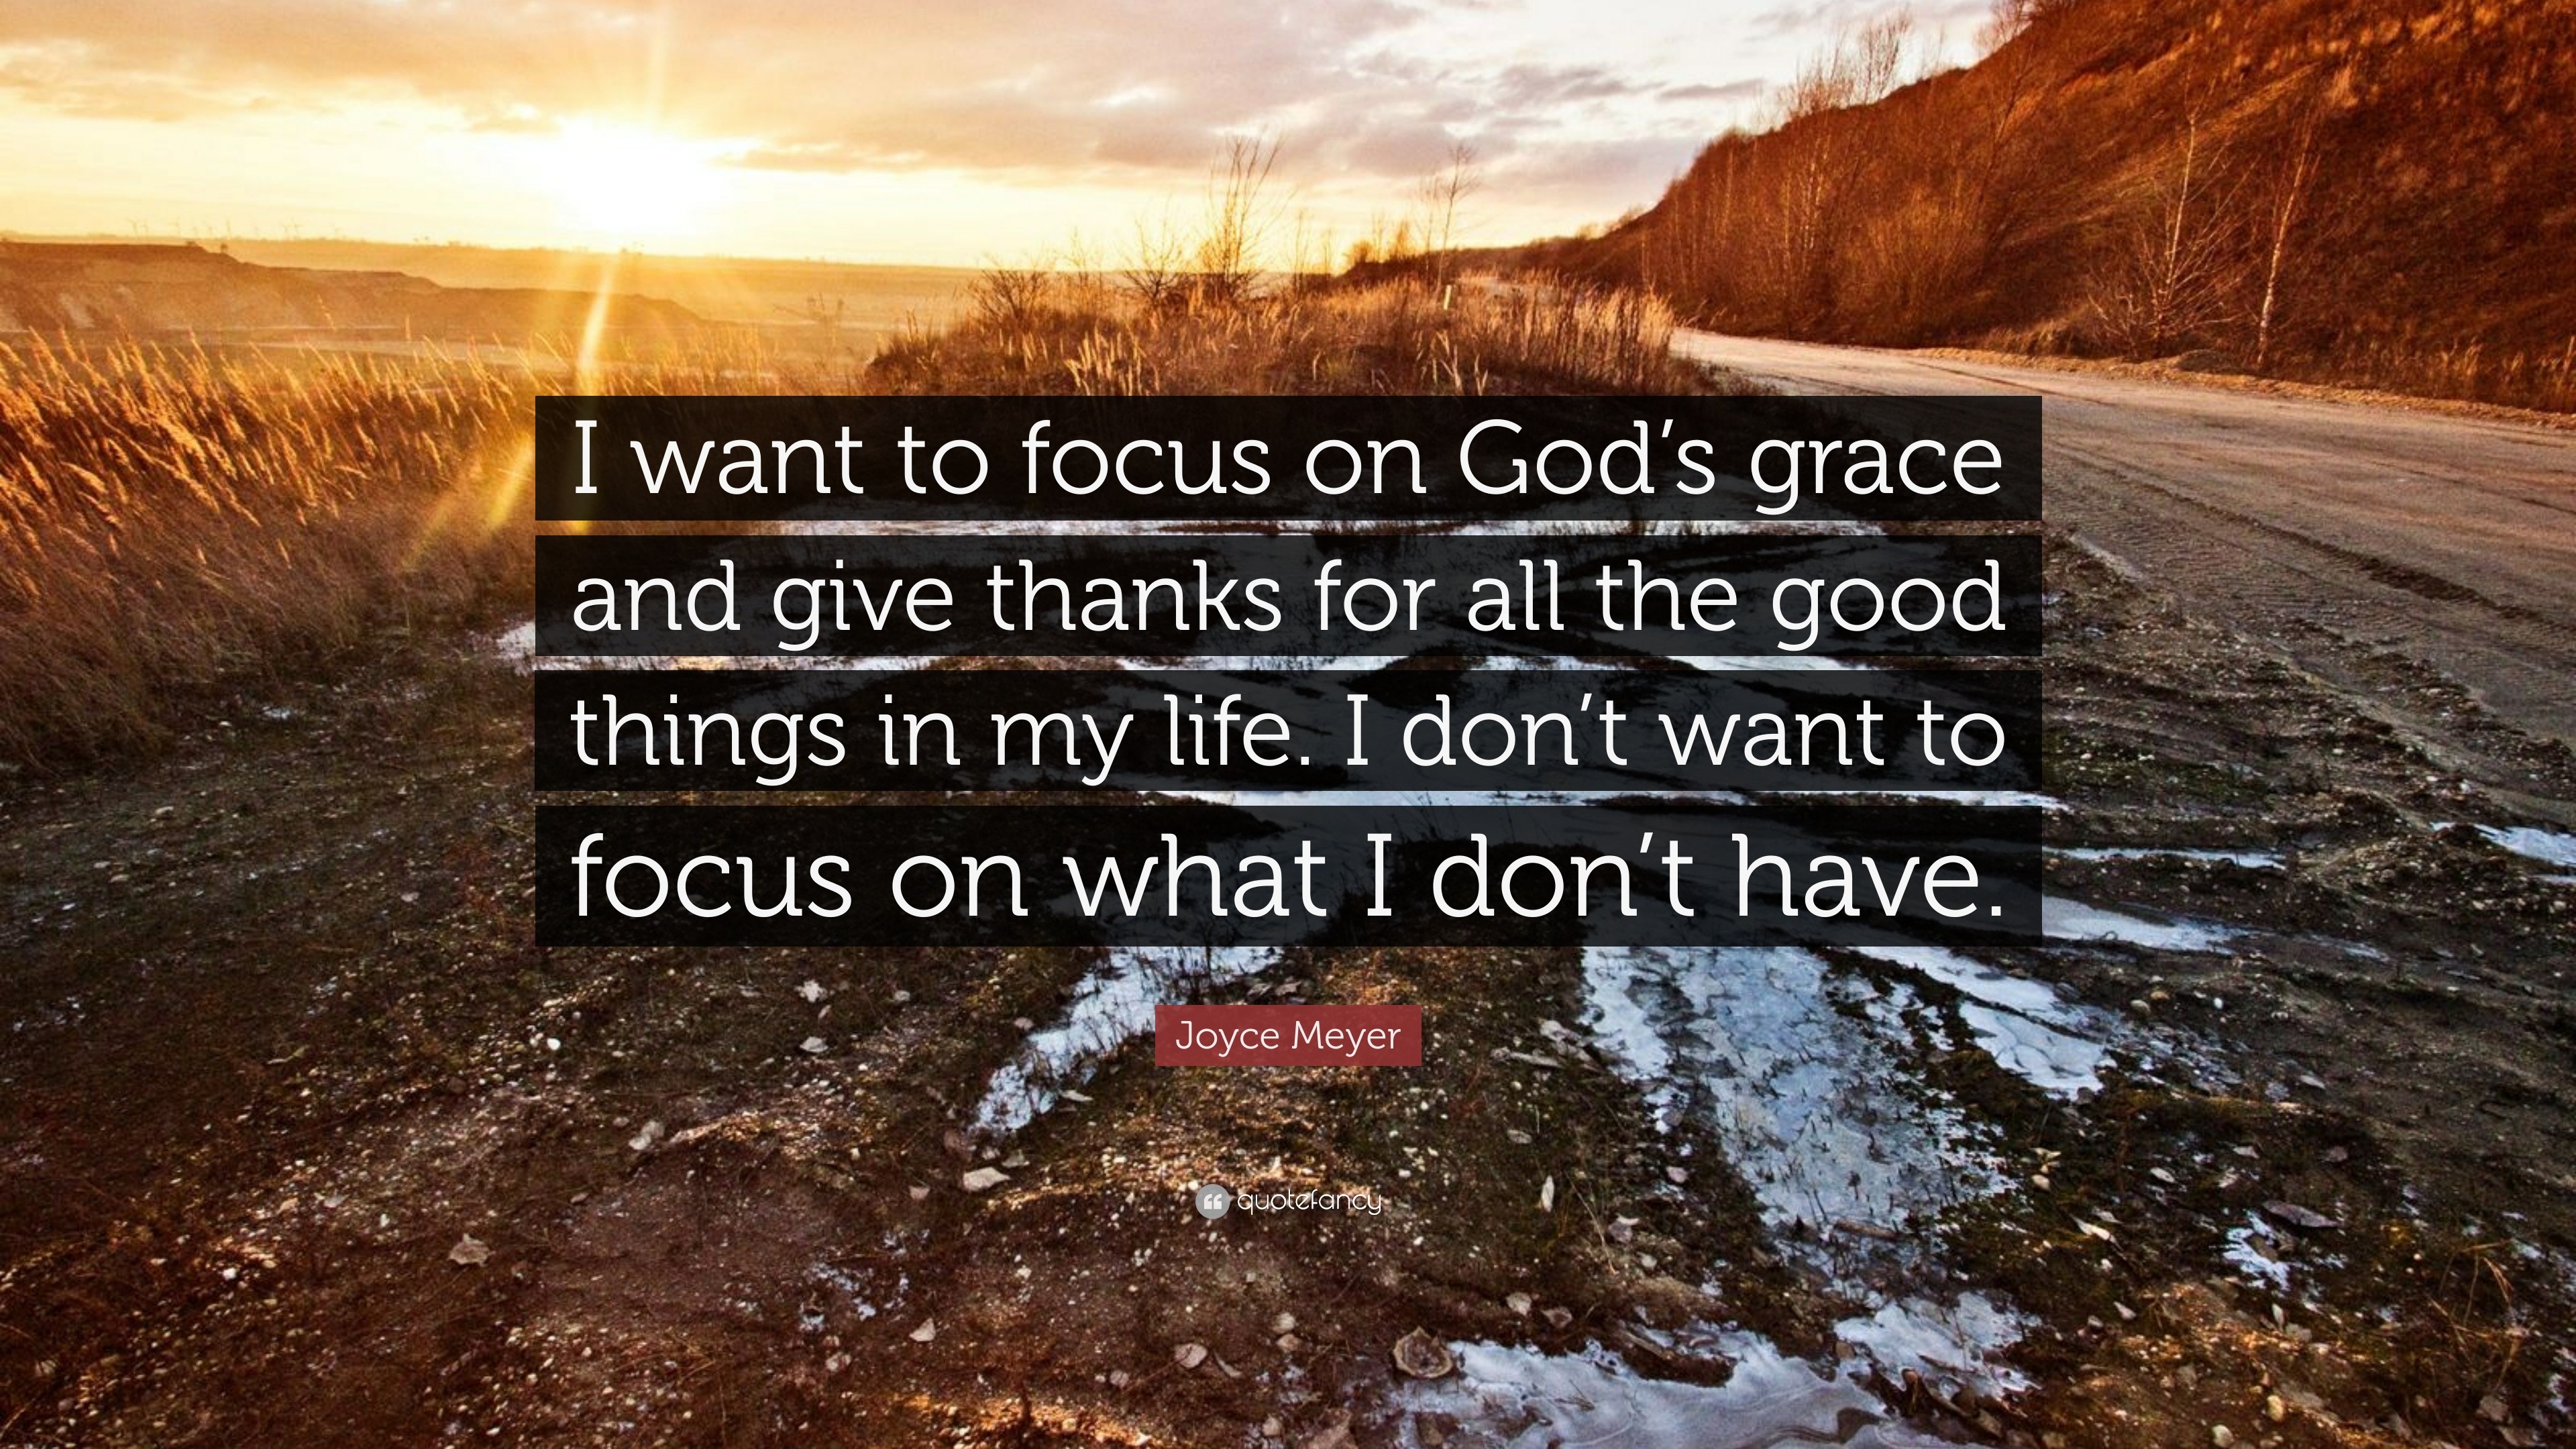 Joyce Meyer Quote “I want to focus on God s grace and give thanks for